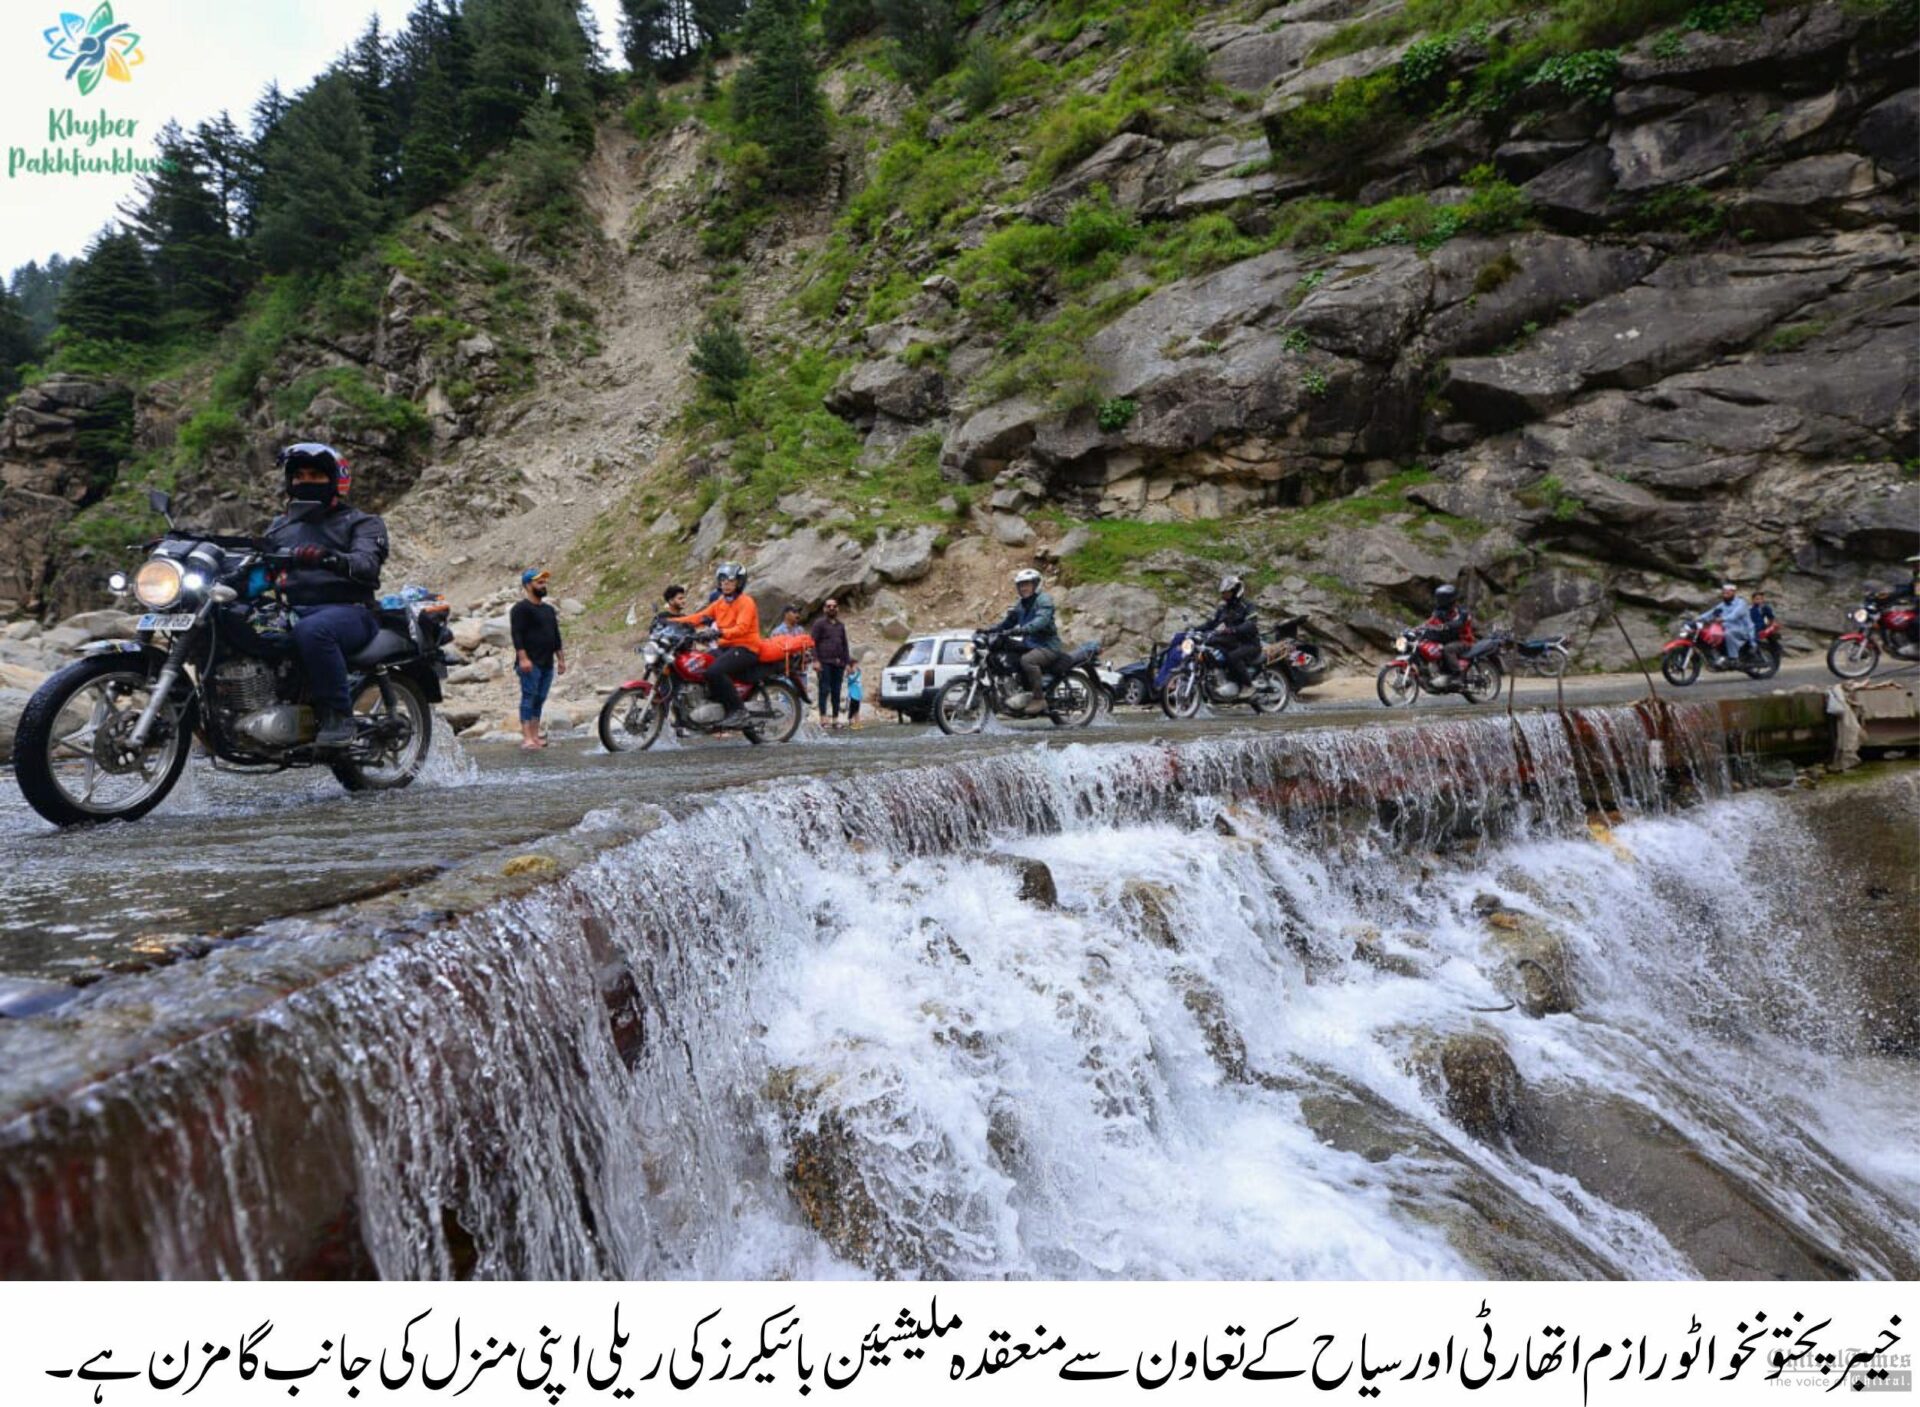 chitraltimes kalash festival chelum jusht concludes bikers attended the event chitral 2